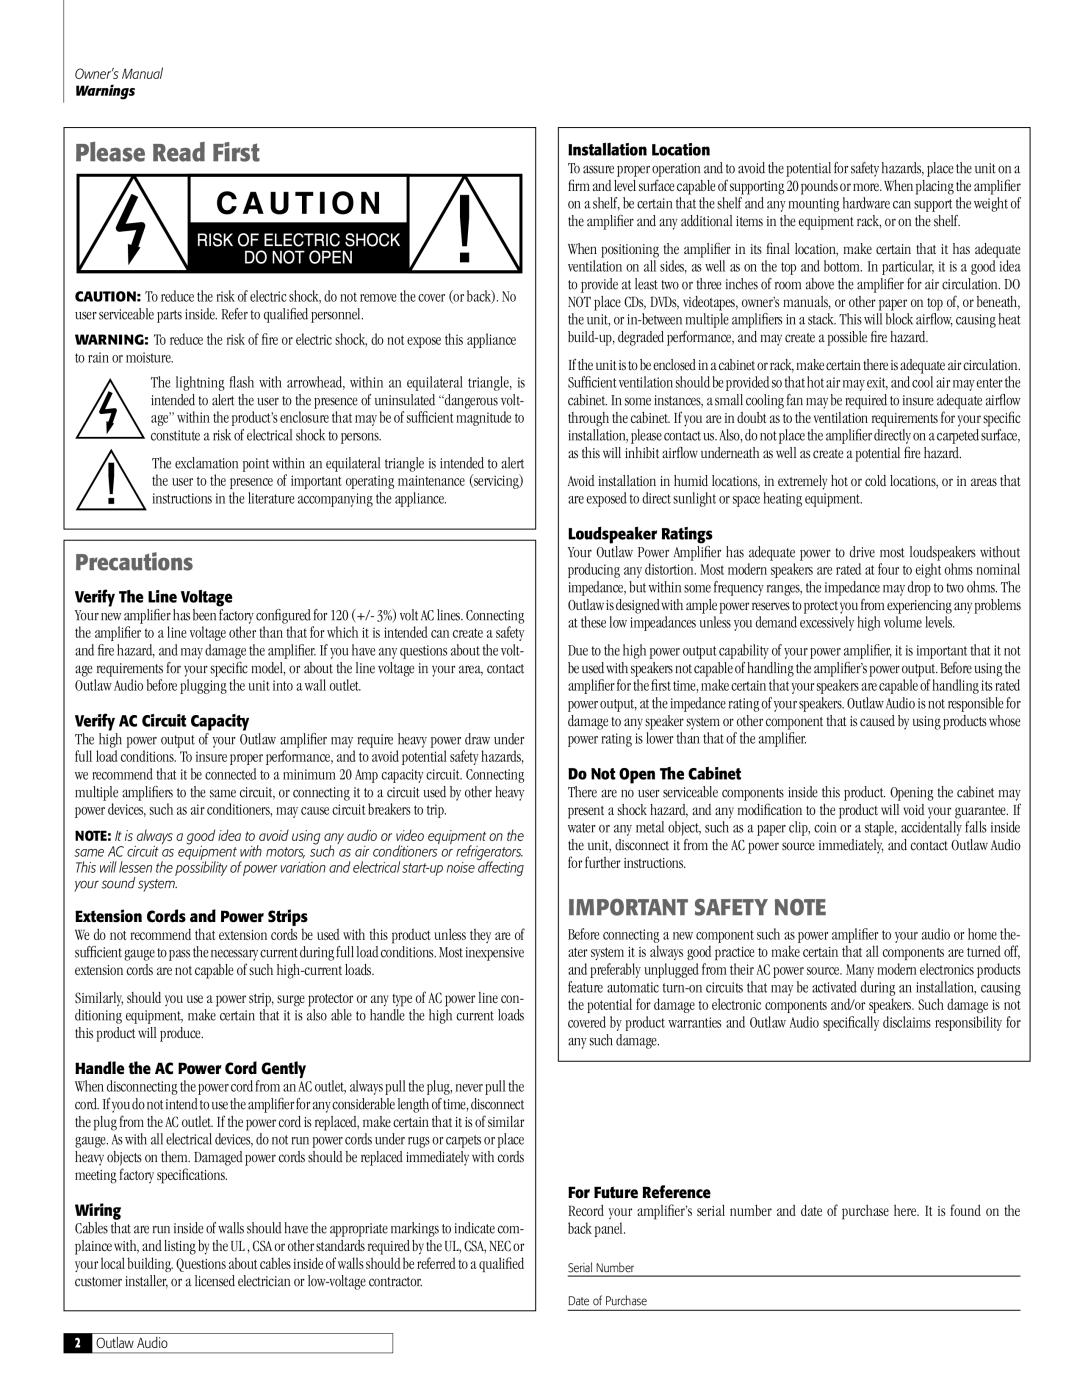 Outlaw Audio 200 M-Block owner manual Please Read First, Precautions, Important Safety Note 